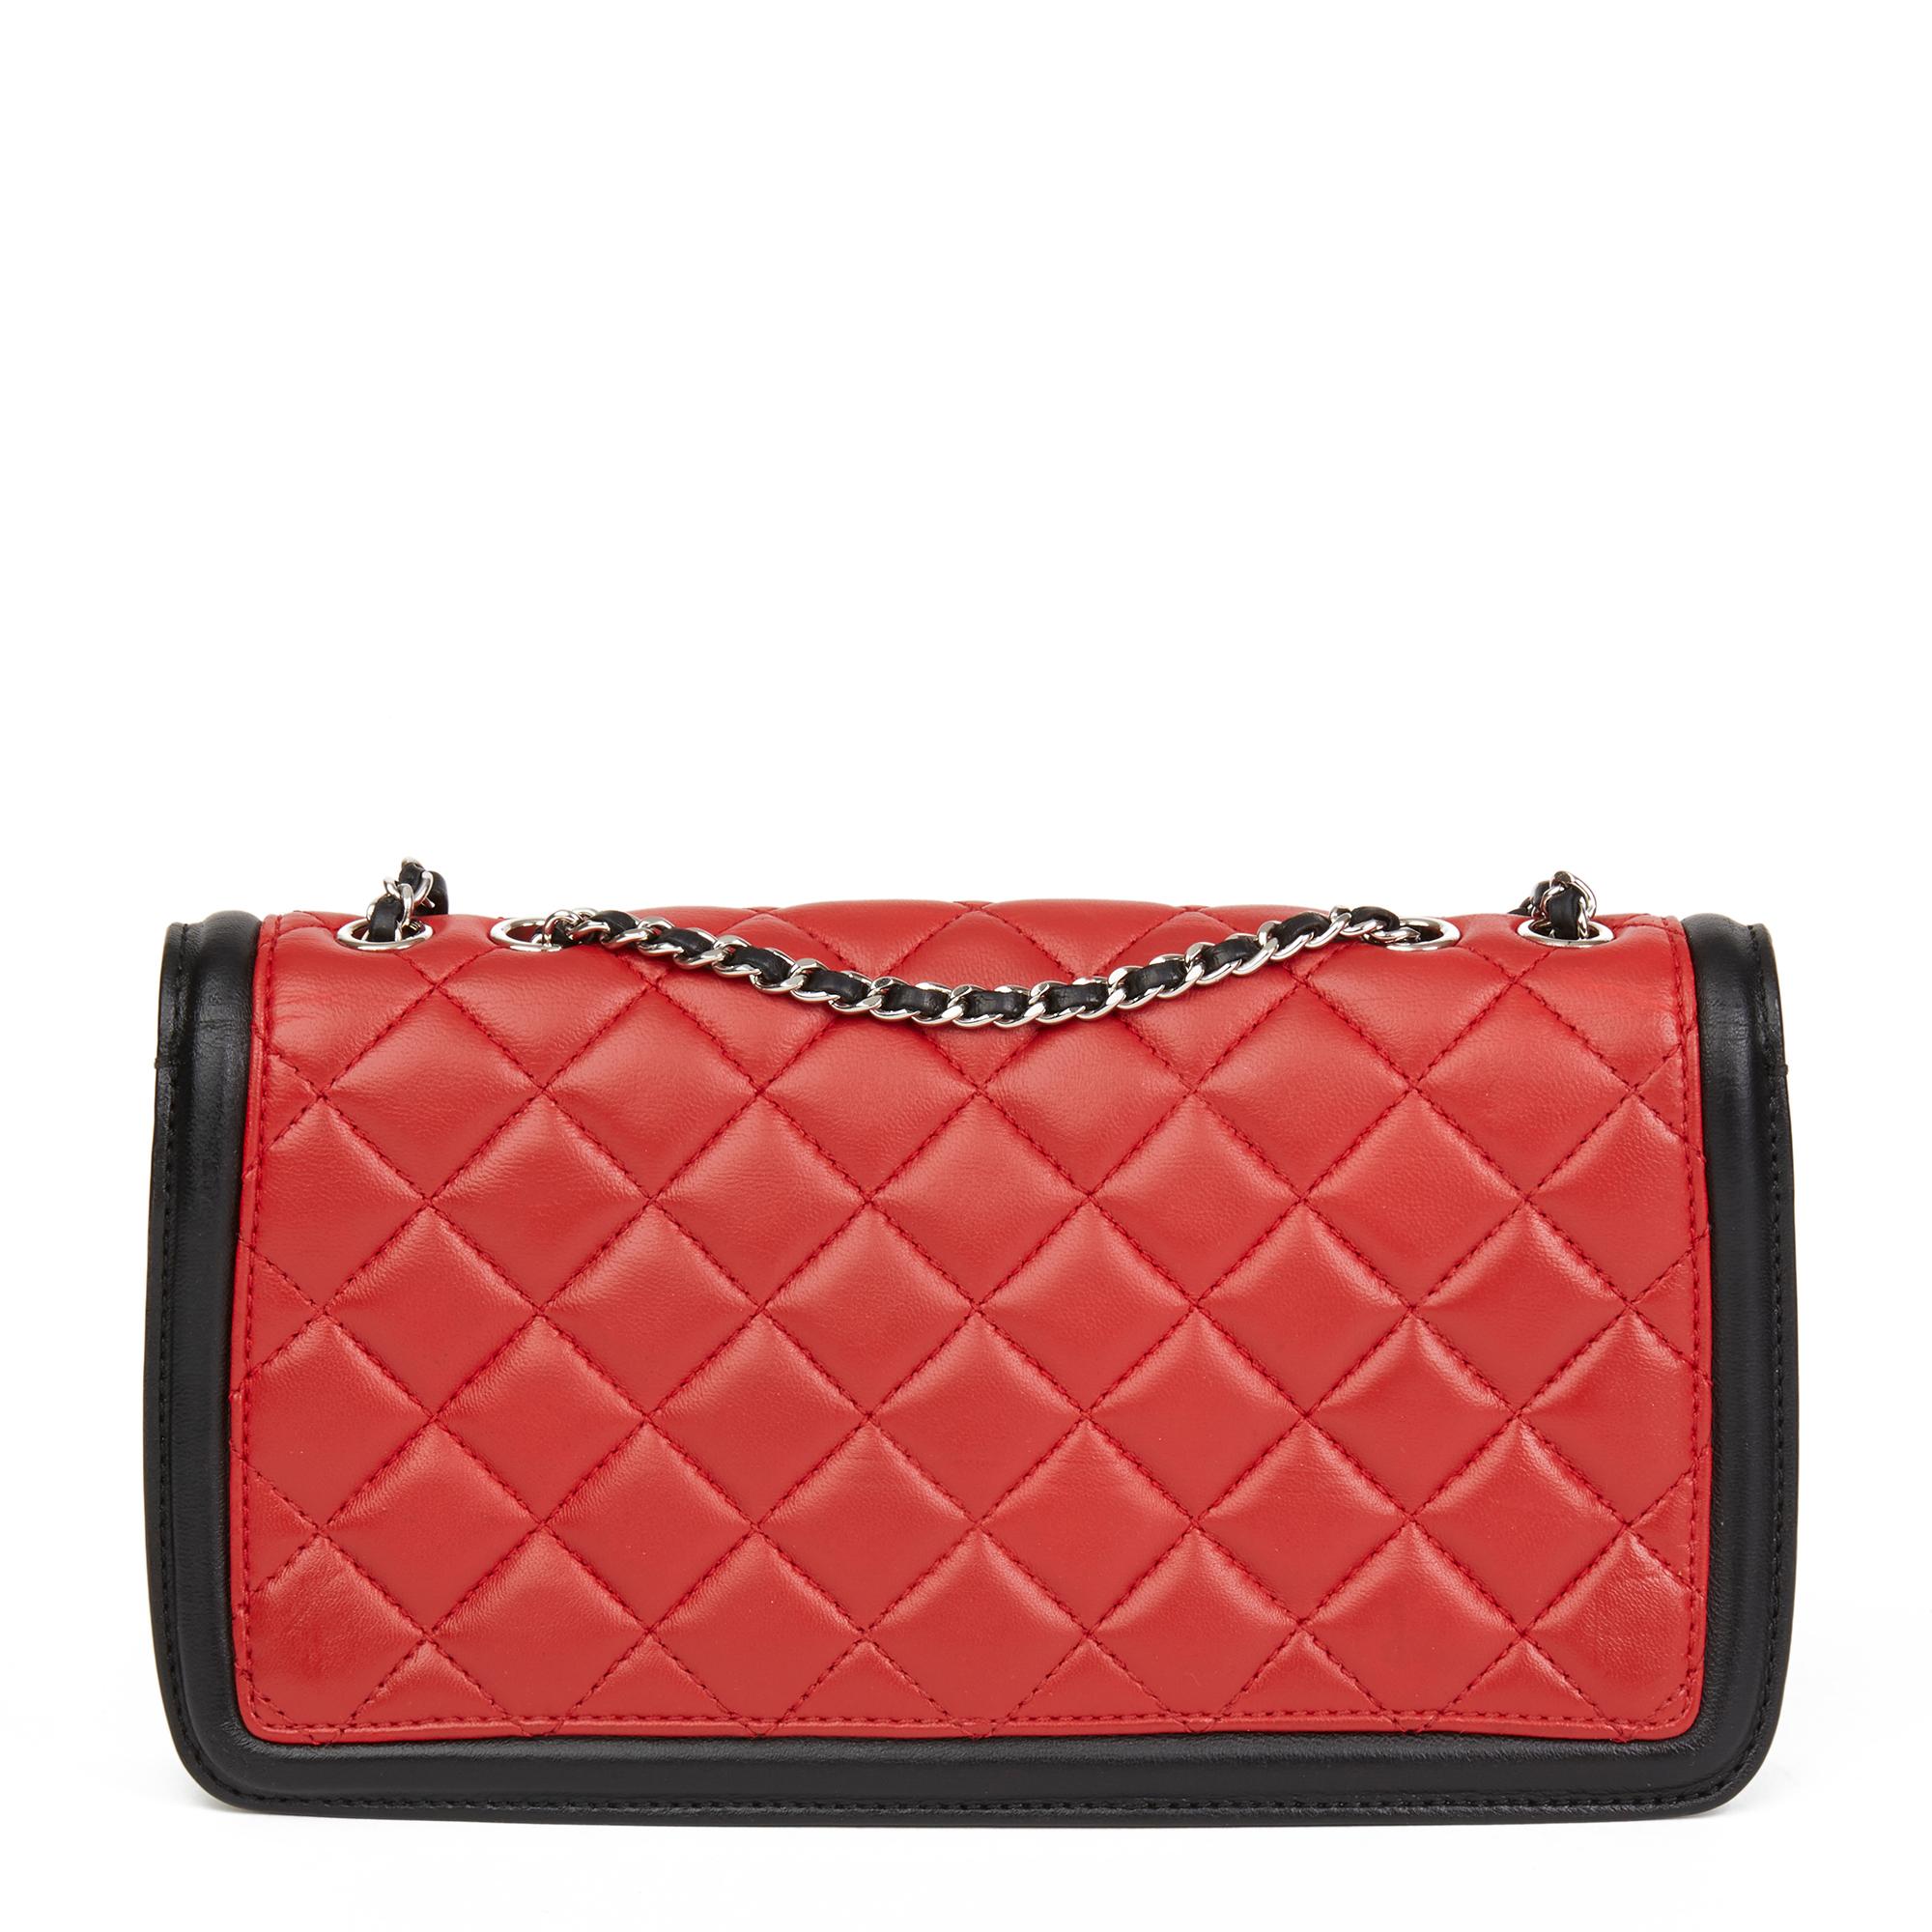 red and black chanel bag